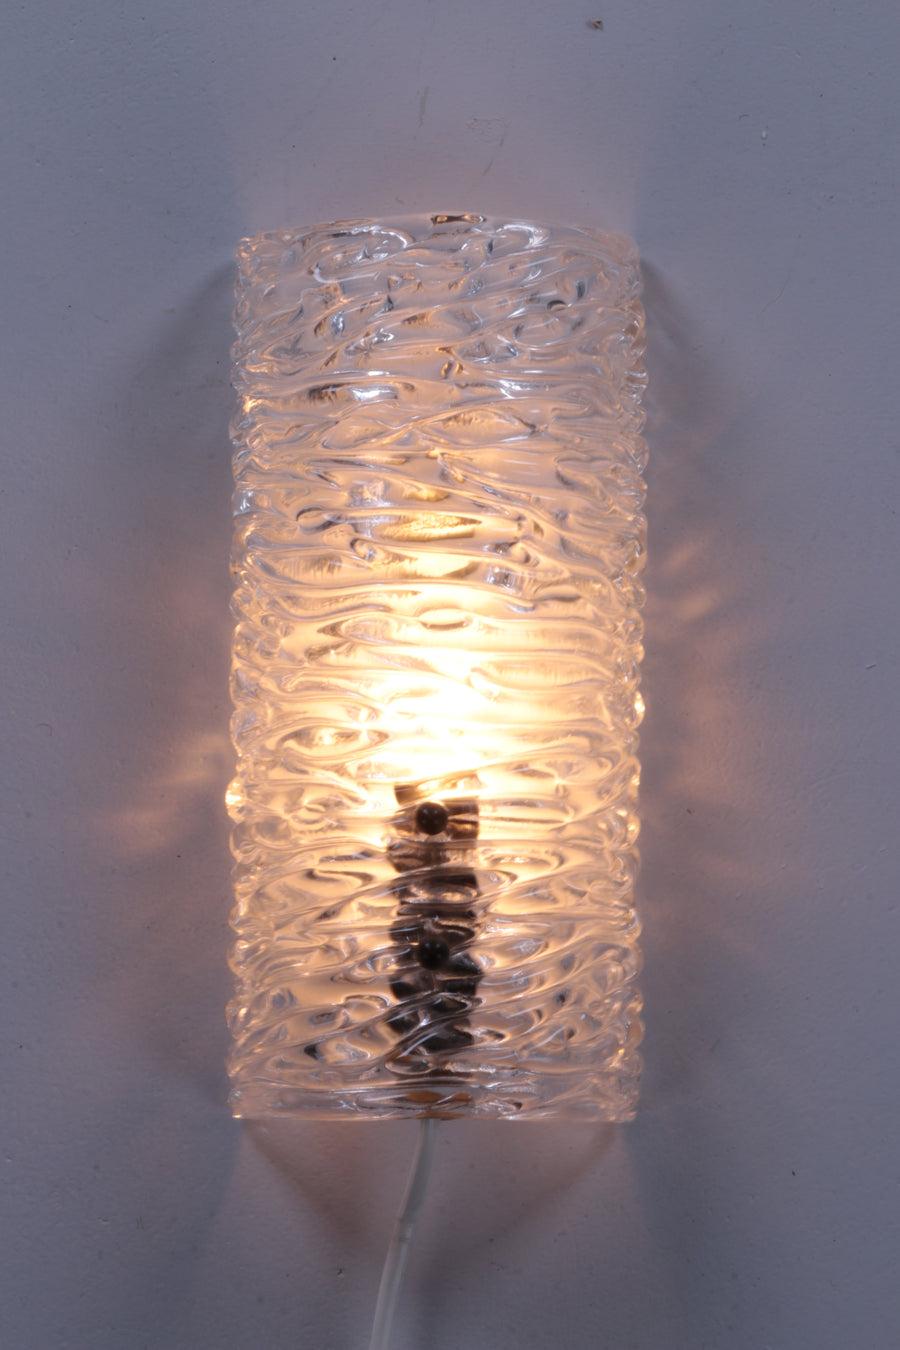 Carl Fagerlund Wall Lamp Model 8493 Made by Orrefors, 1960

Designed by Carl Fagerlund for Orrefors Sweden.

The lamp is made of thick pressed glass with ice relief, an iron fixture and metal knobs.

The light is beautifully spread through the